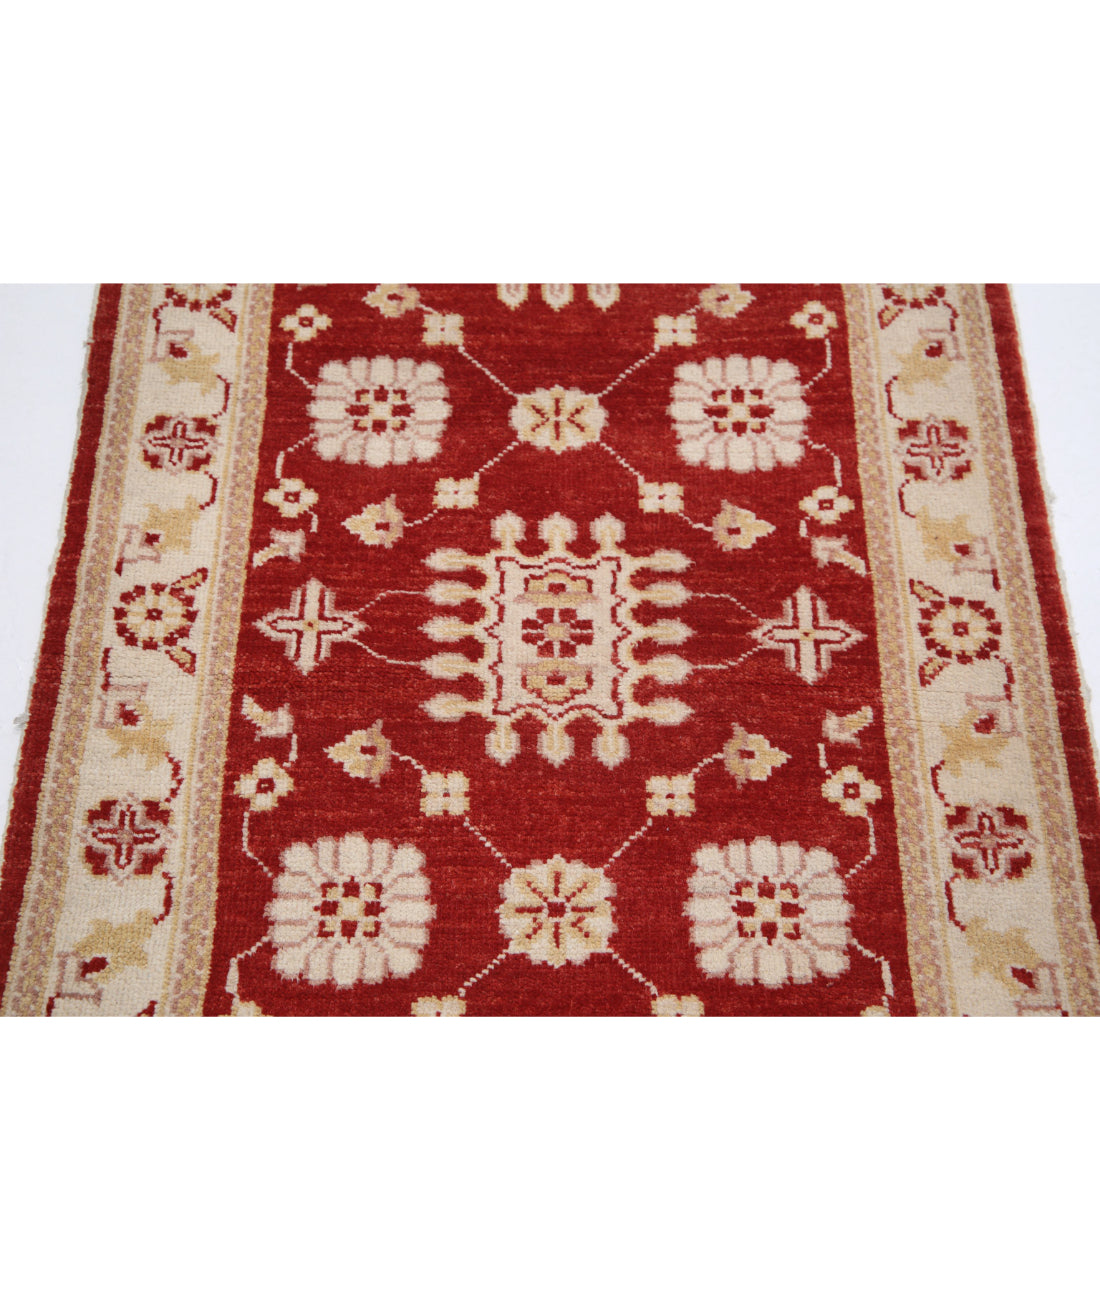 Ziegler 2'6'' X 4'1'' Hand-Knotted Wool Rug 2'6'' x 4'1'' (75 X 123) / Red / Ivory